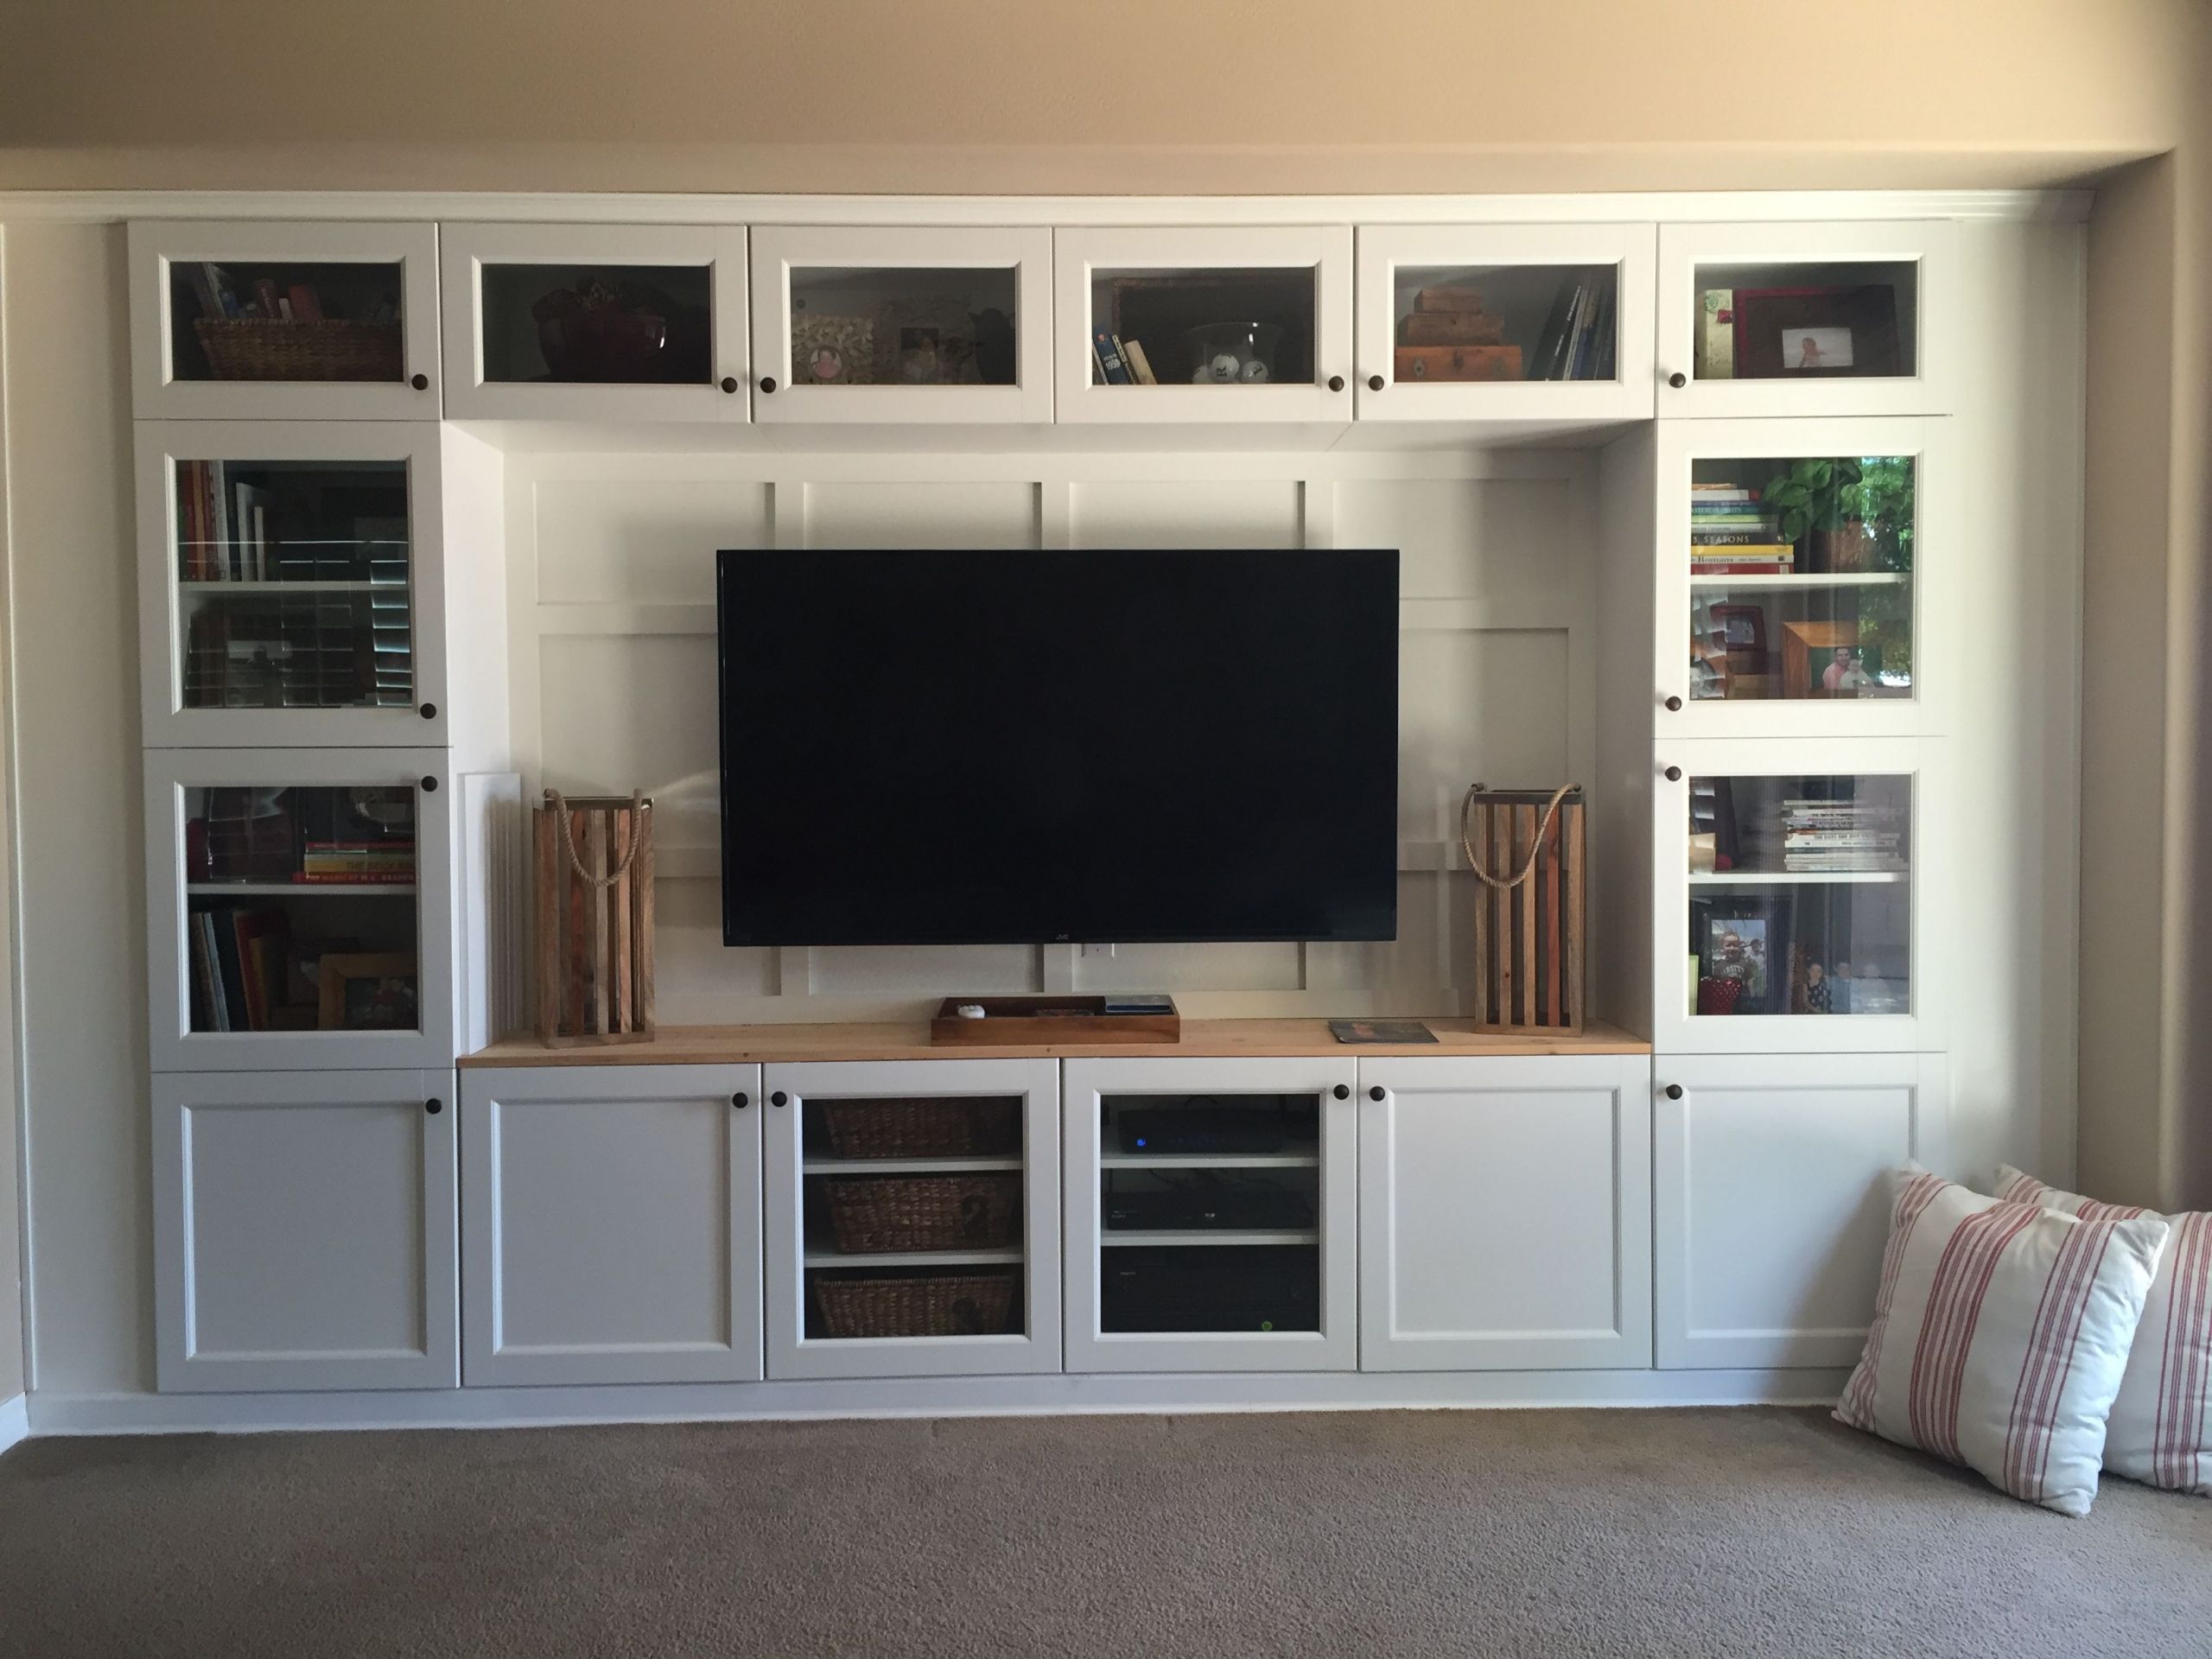 Ikea Wall Units Living Room
 Built in media using IKEA cabinets and lumber